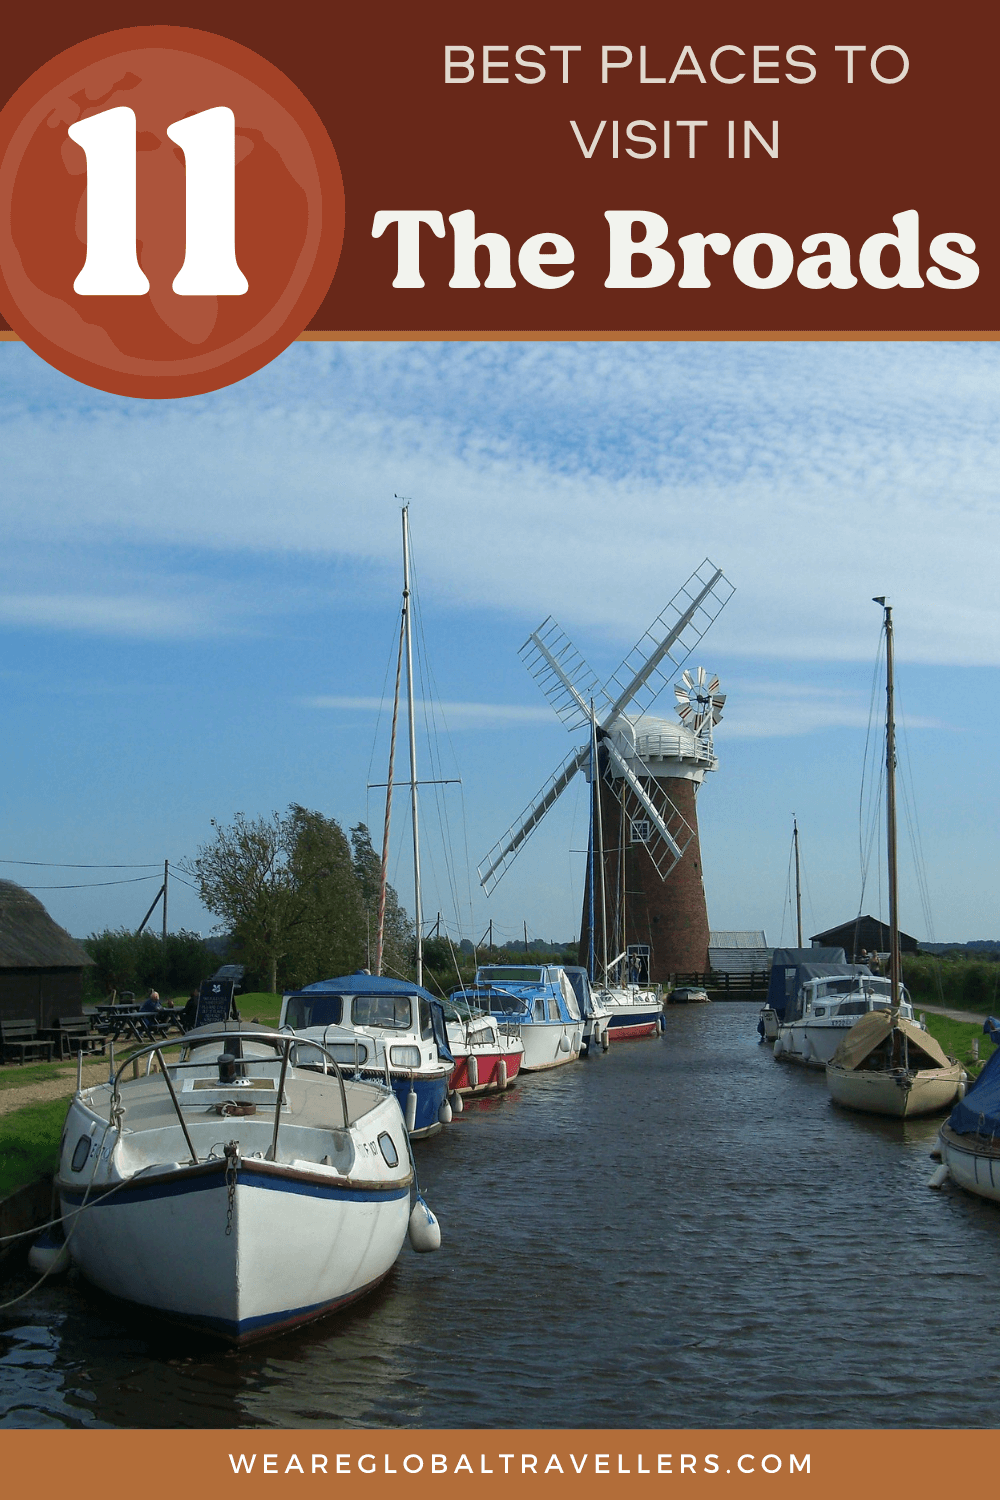 A complete guide to The Broads National Park, England